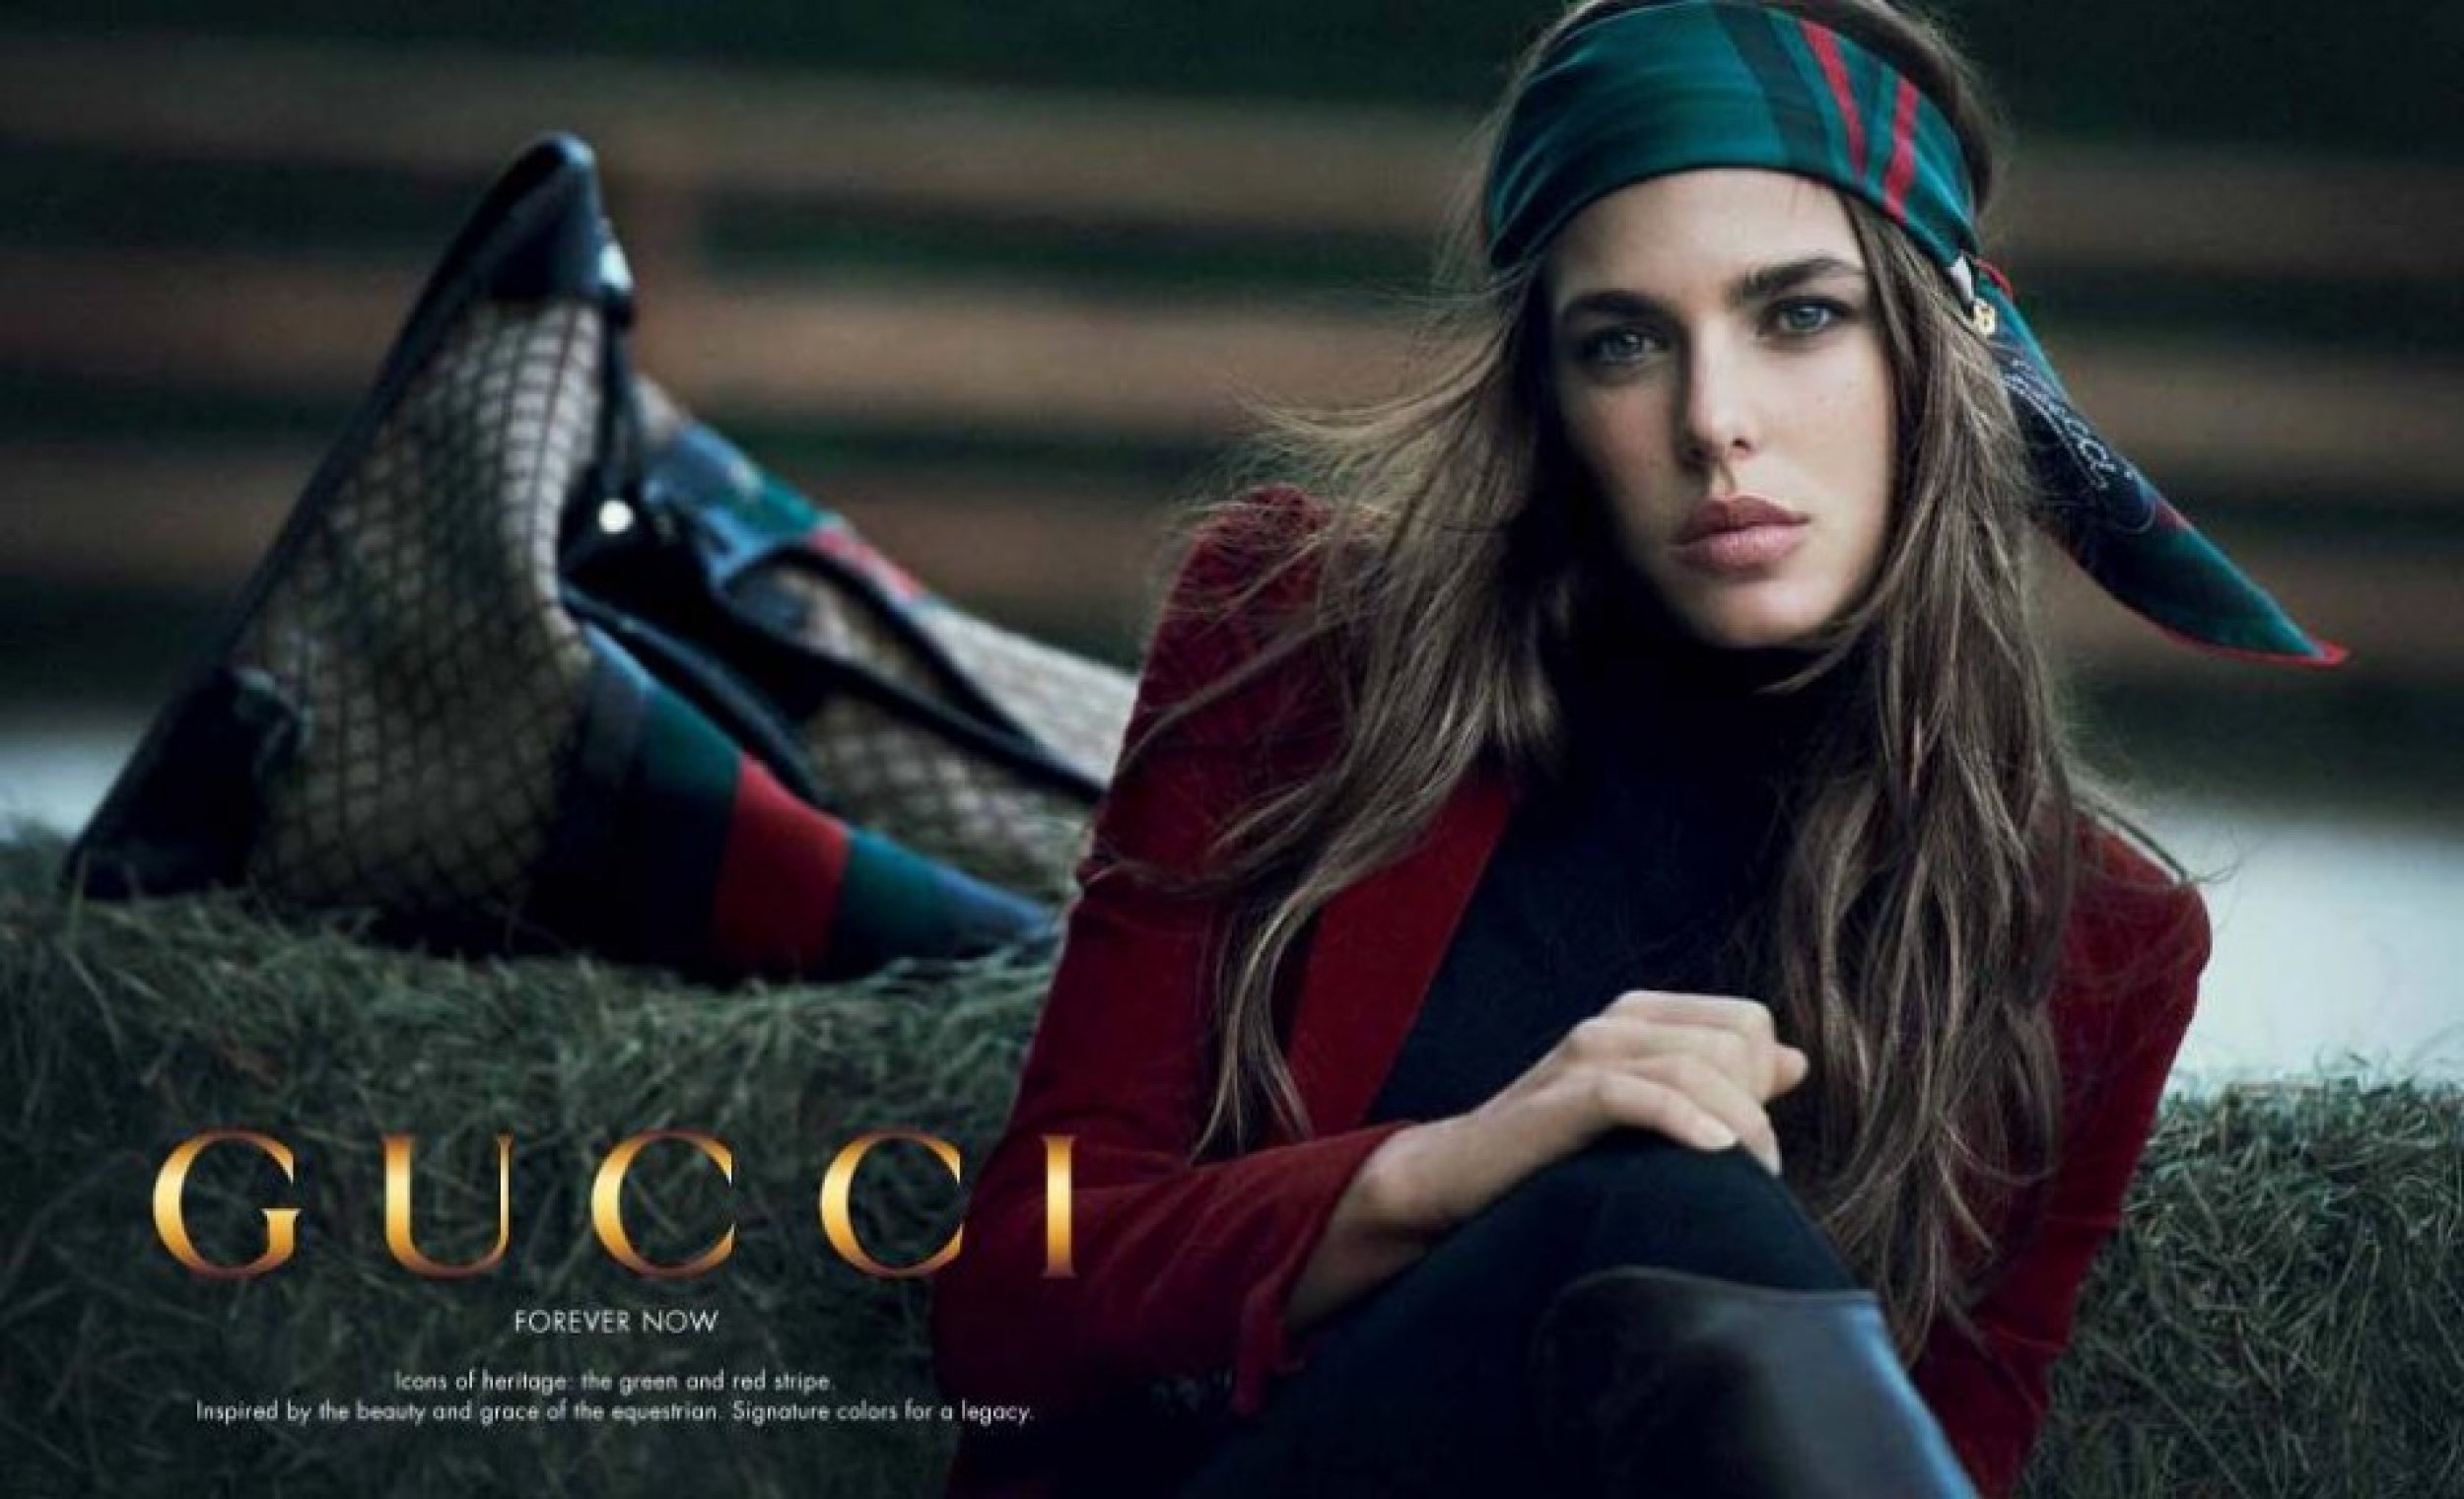 First Look Royal Princess Charlotte Casiraghis Forever Now Campaign for Gucci